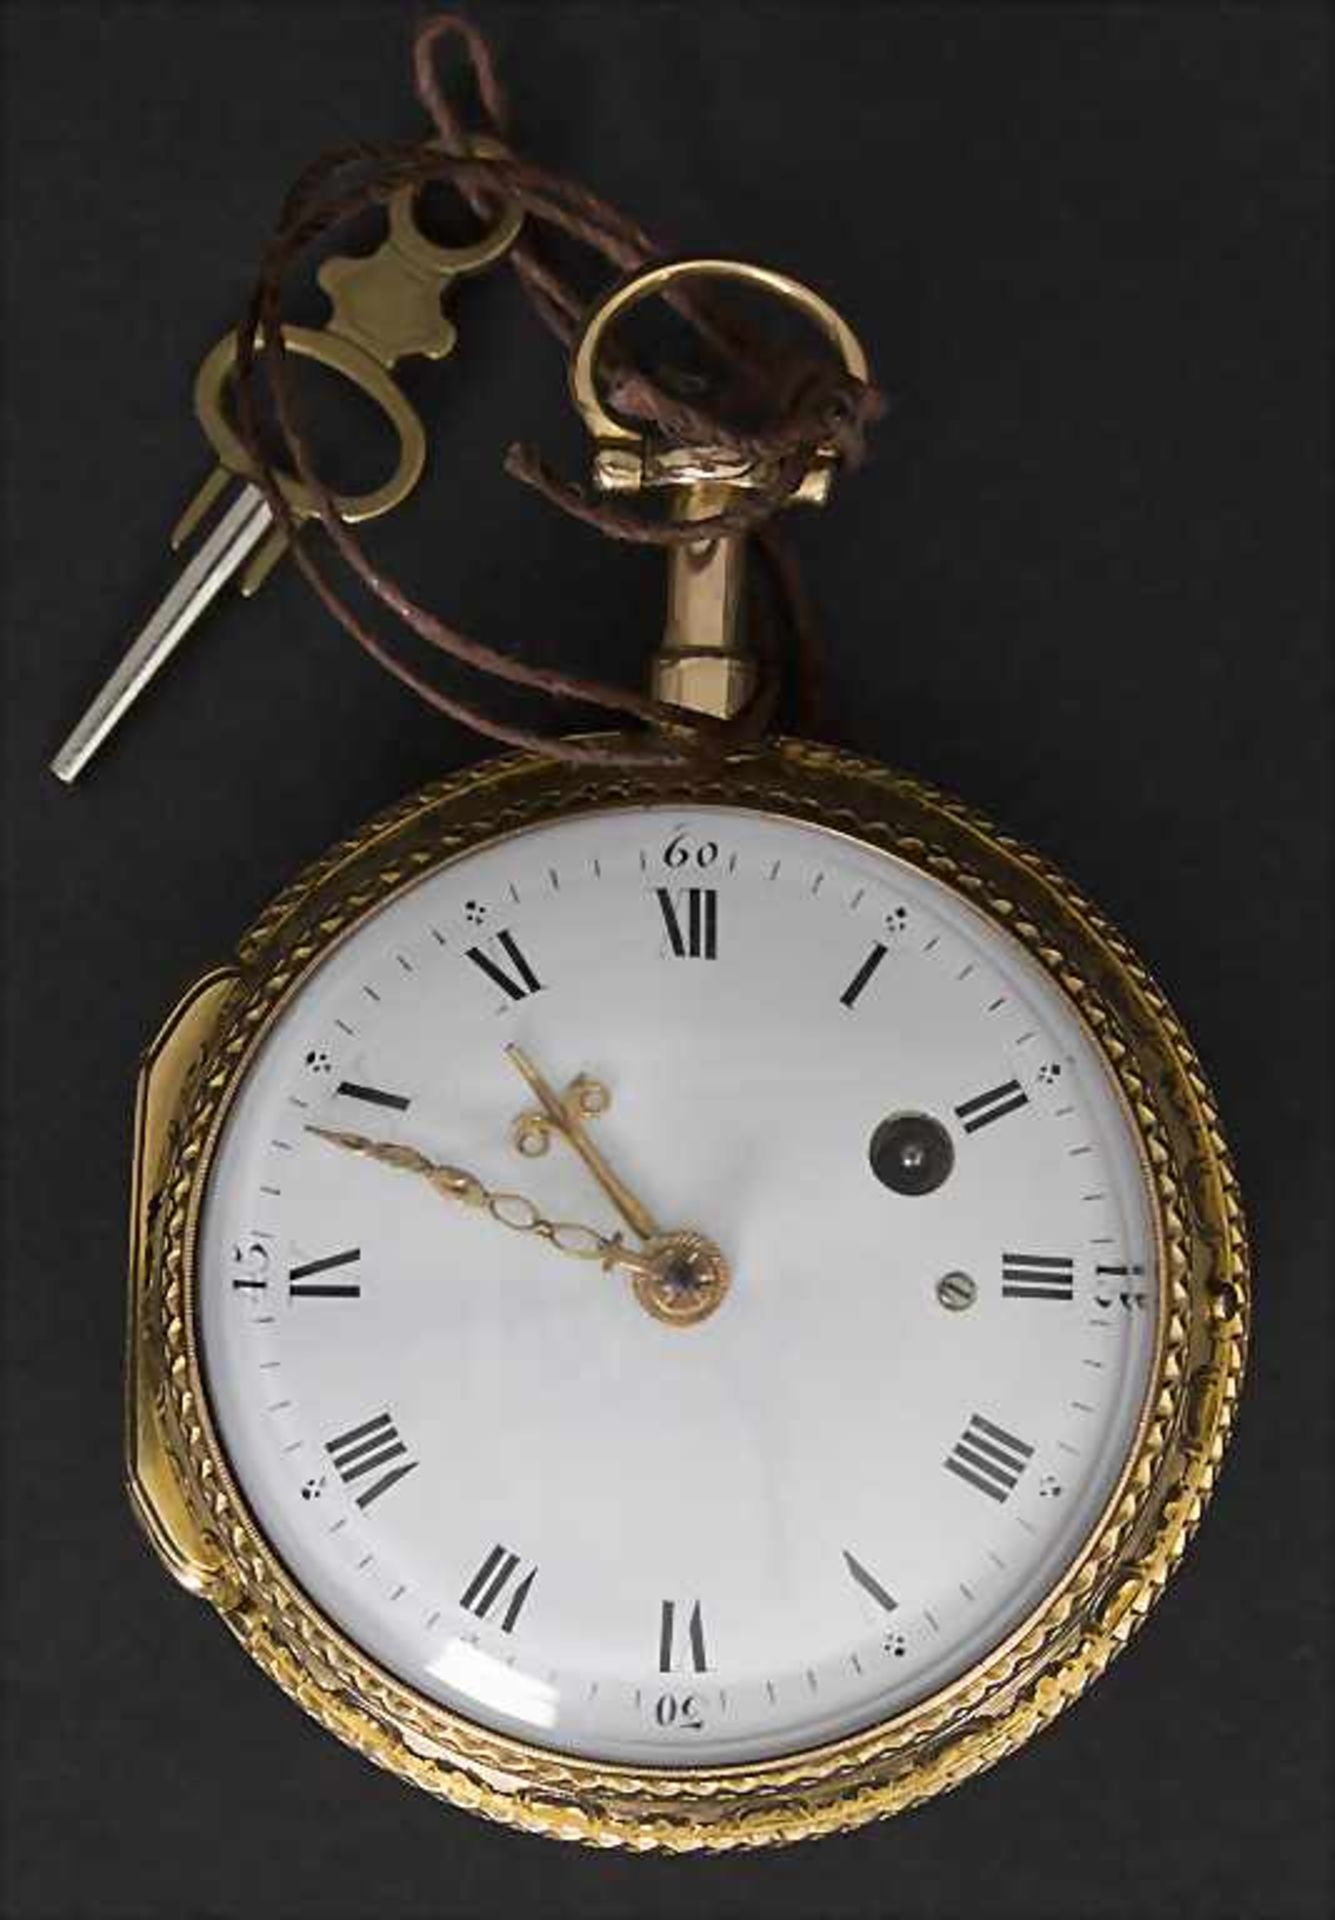 François Jolly, Offene Taschenuhr mit 1/4 Repetition / A pocket watch 1/4 quarter repeater, Paris, - Image 2 of 3